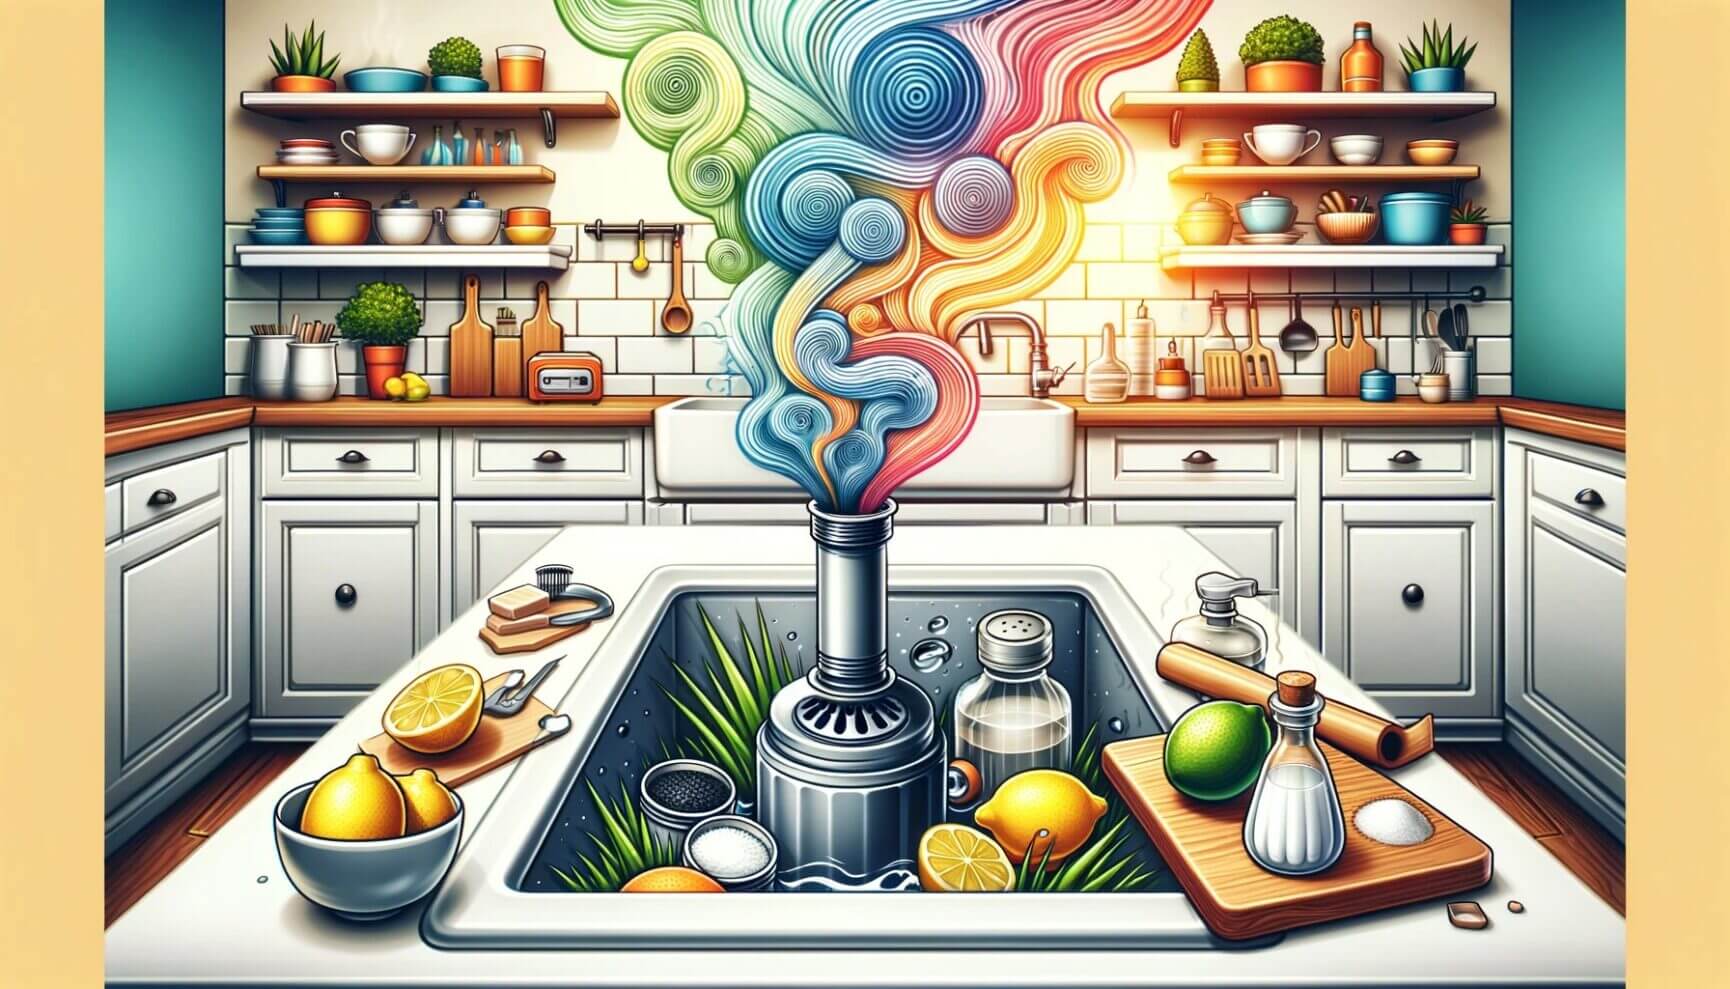 A colorful illustration of a kitchen with a steaming pot.